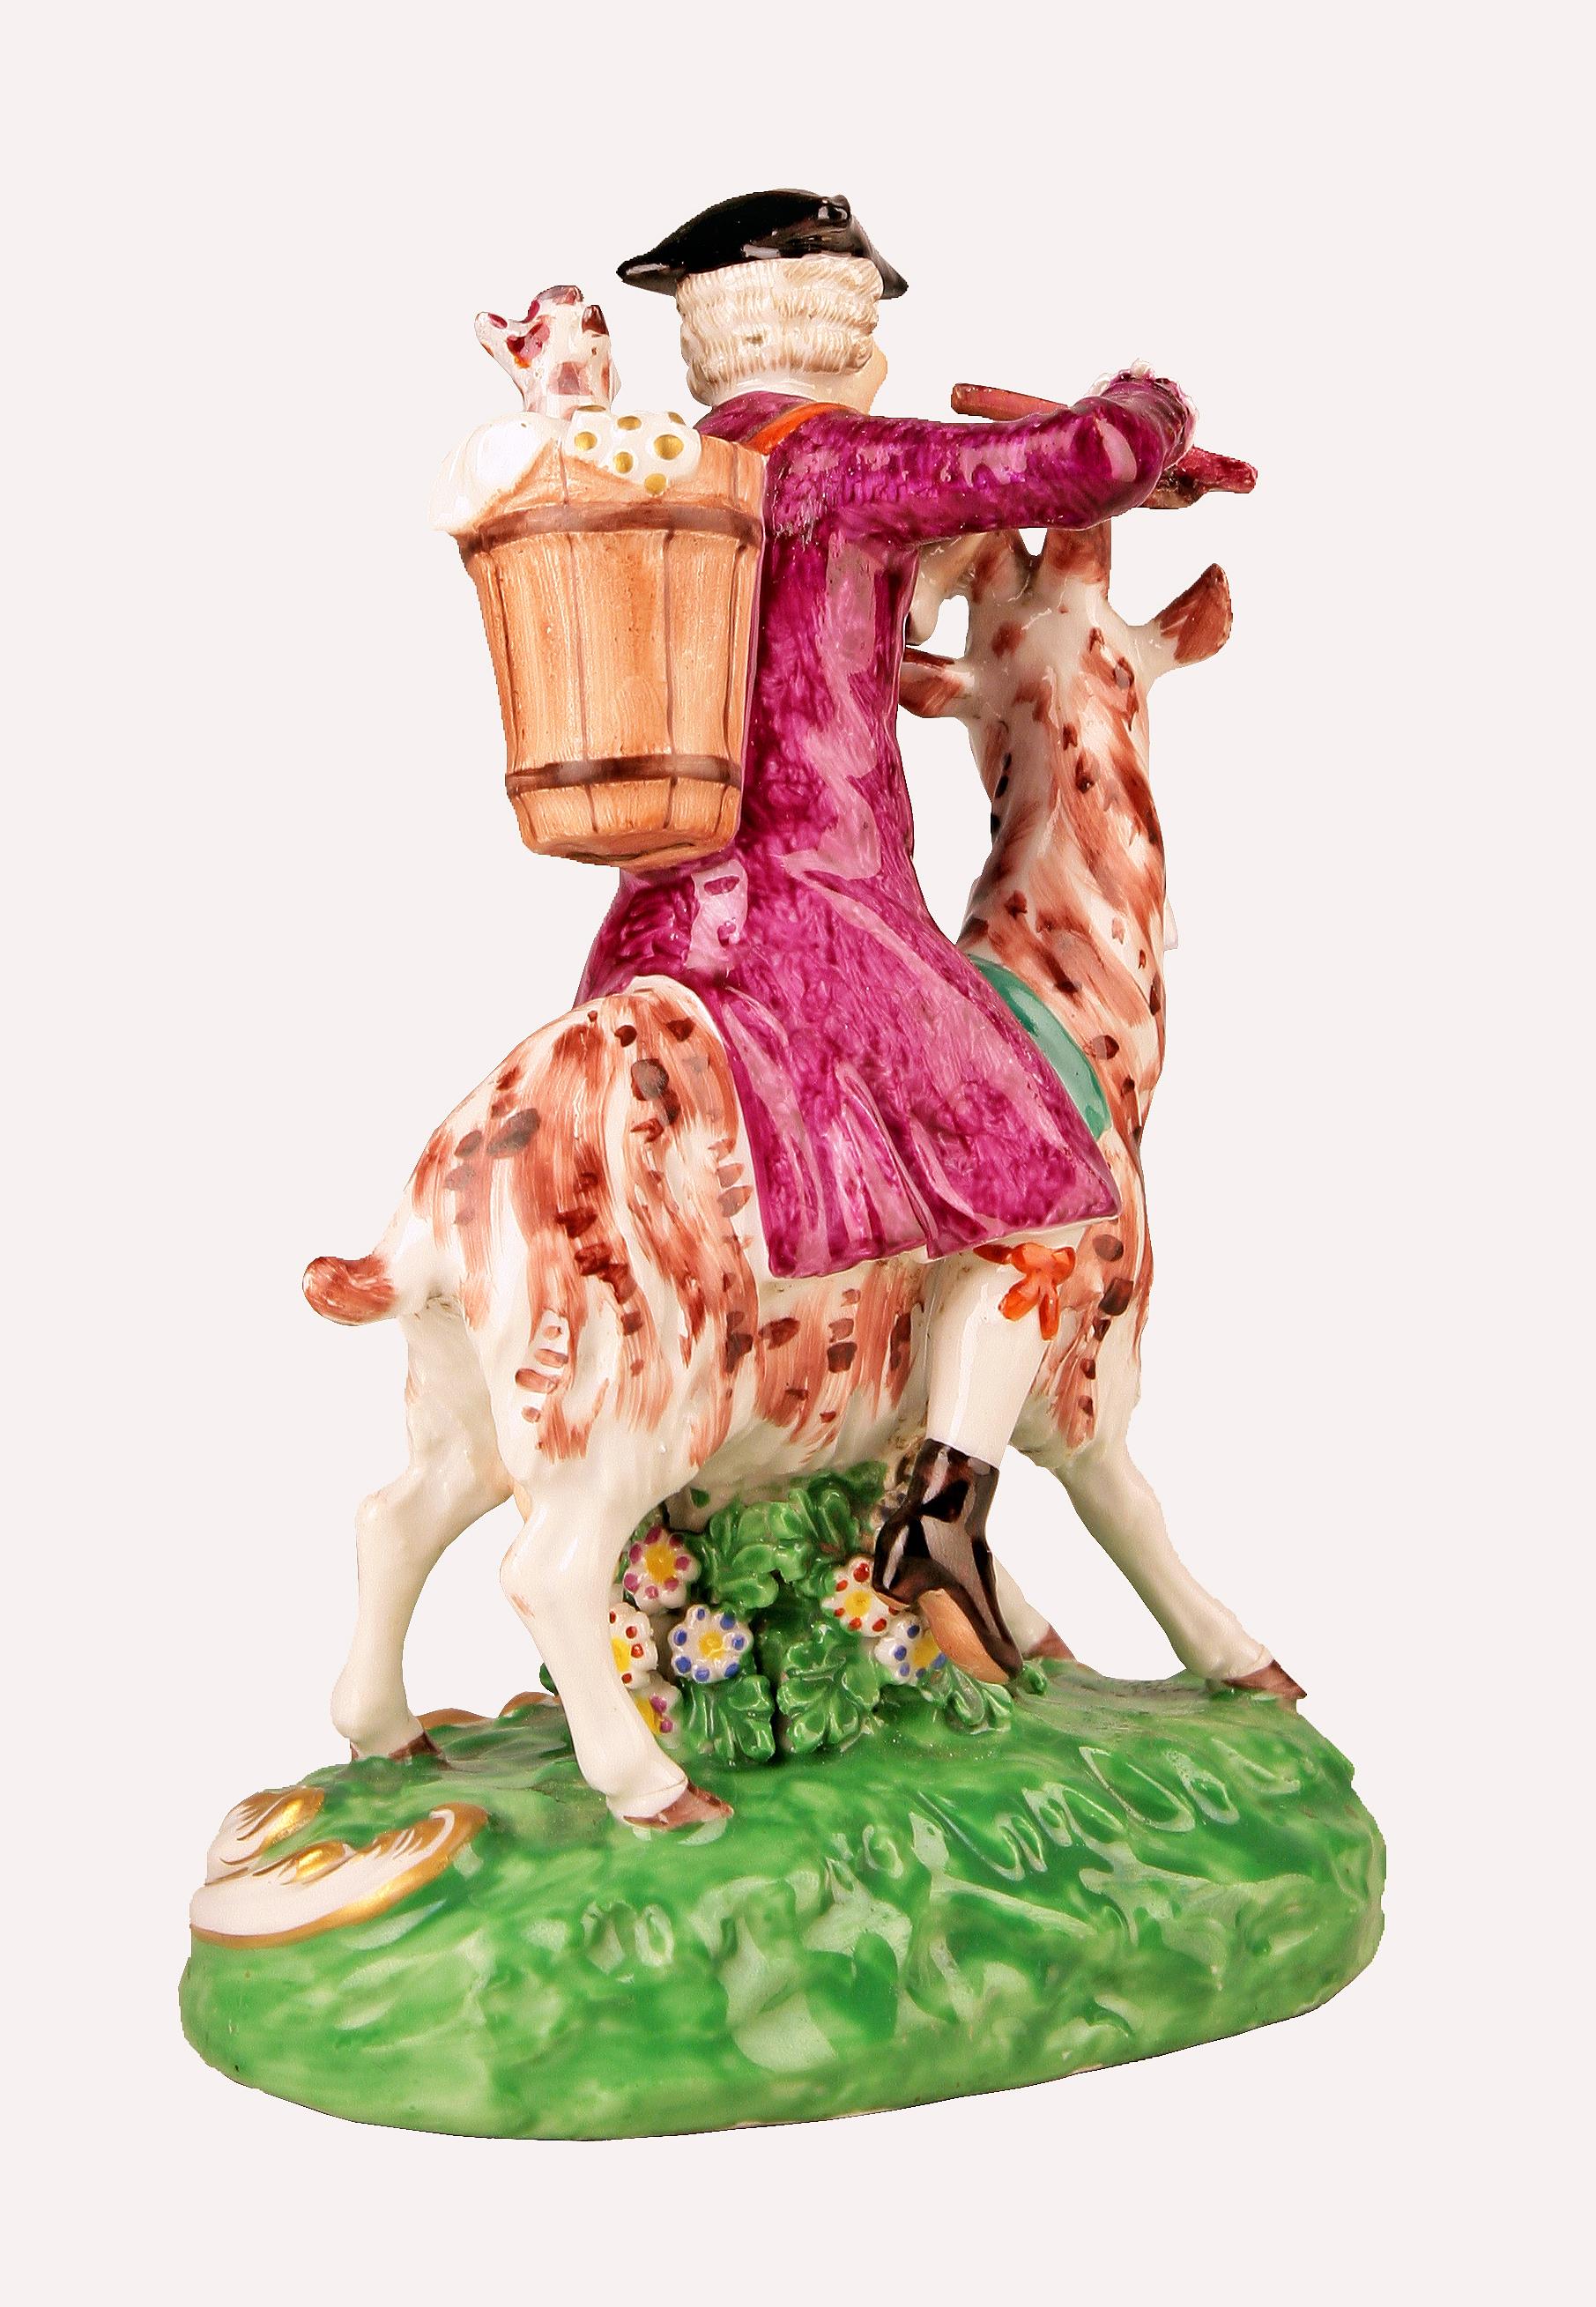 Enameled 18th C. Baroque/Rococo English Goat-Riding Tailor Porcelain by Chelsea Pottery For Sale